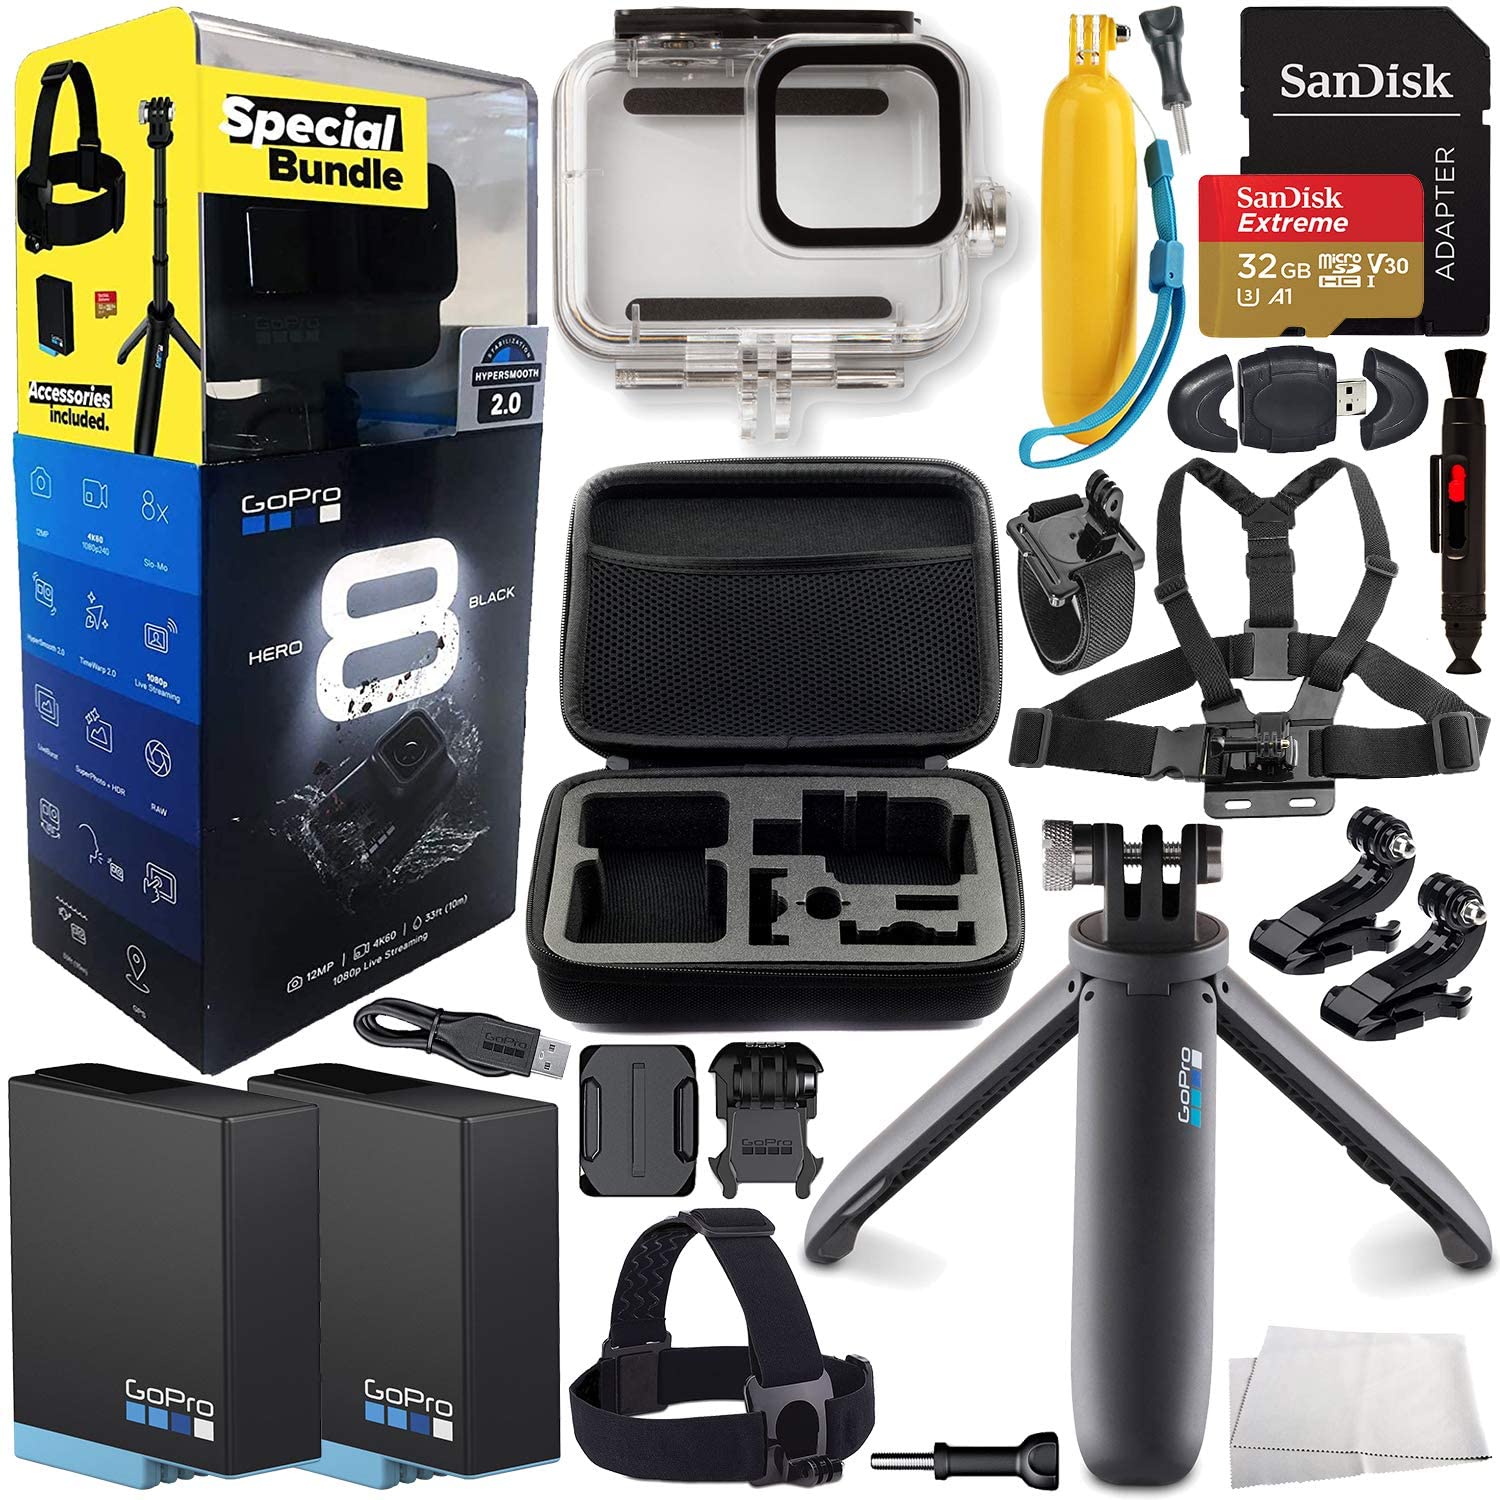 GoPro HERO8 (Hero 8) Action Camera (Black) 2019 Bundle & Additional Accessories - Includes: Extreme 32GB microSD, Shorty, Head Strap, Underwater Housing, Carrying Case & More